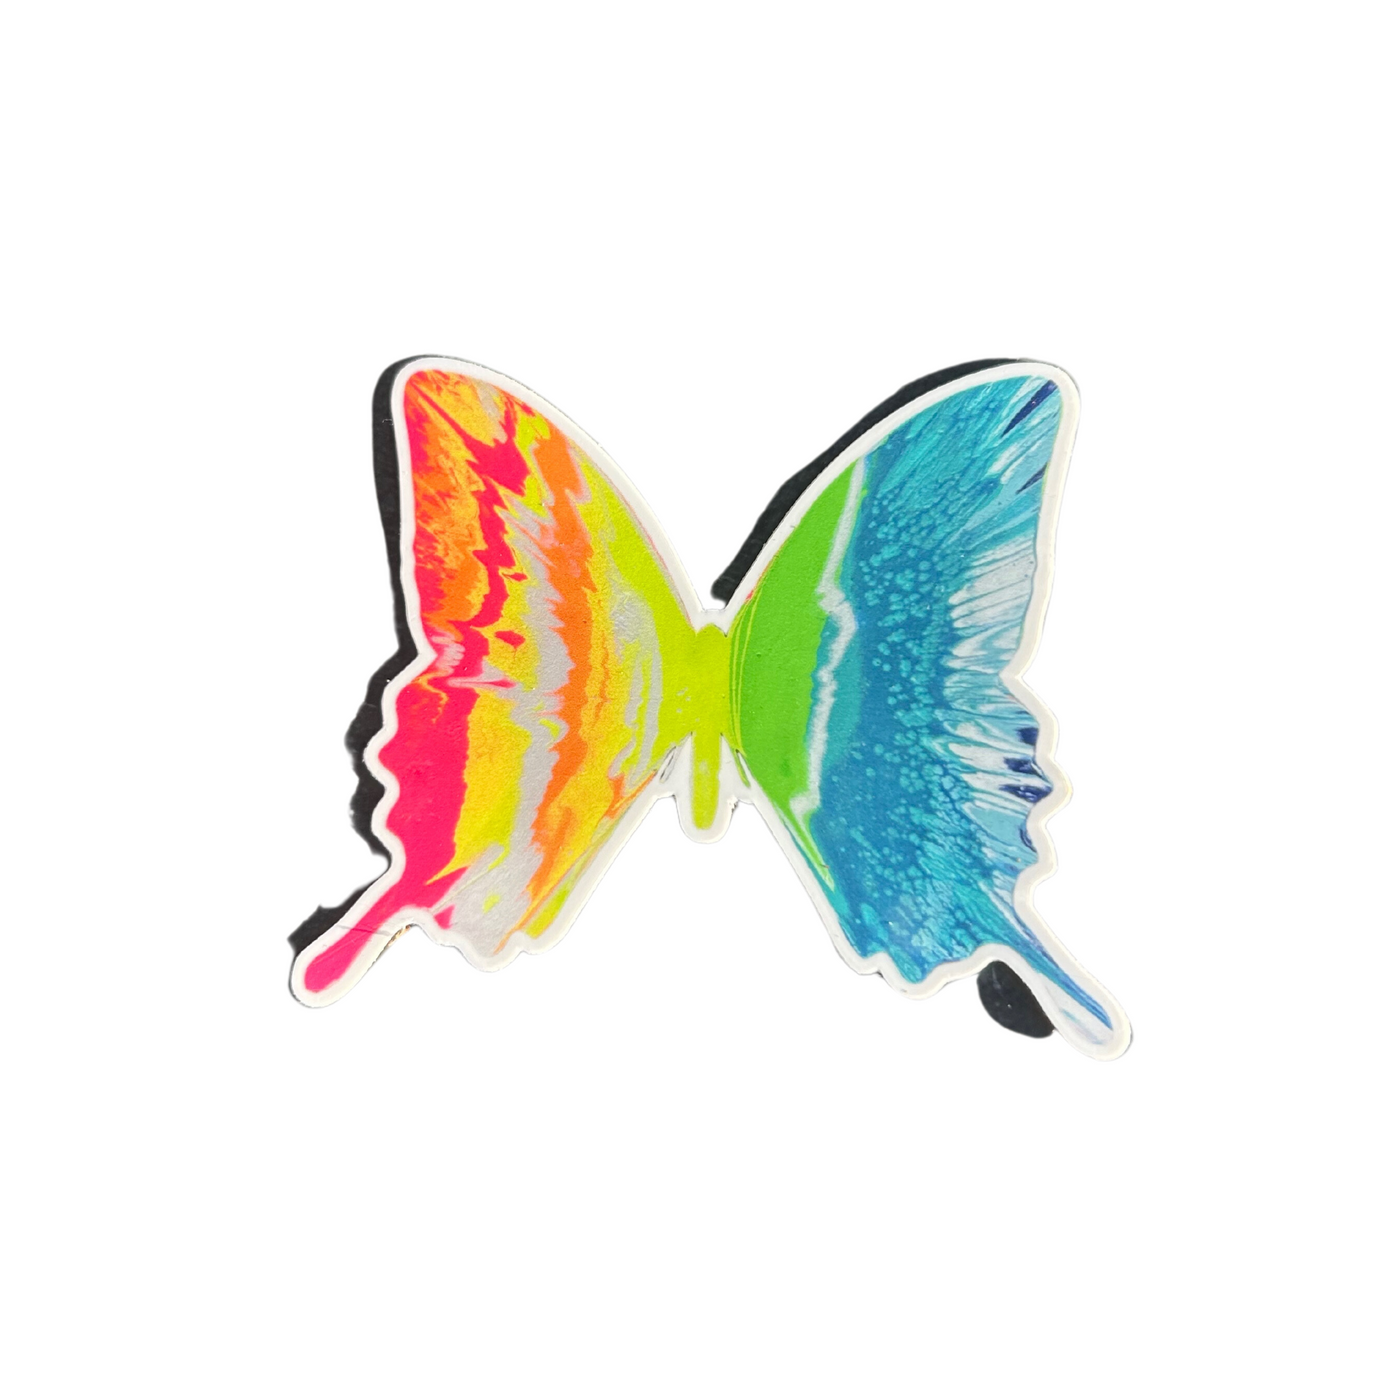 "Color Delight Butterfly" Sticker